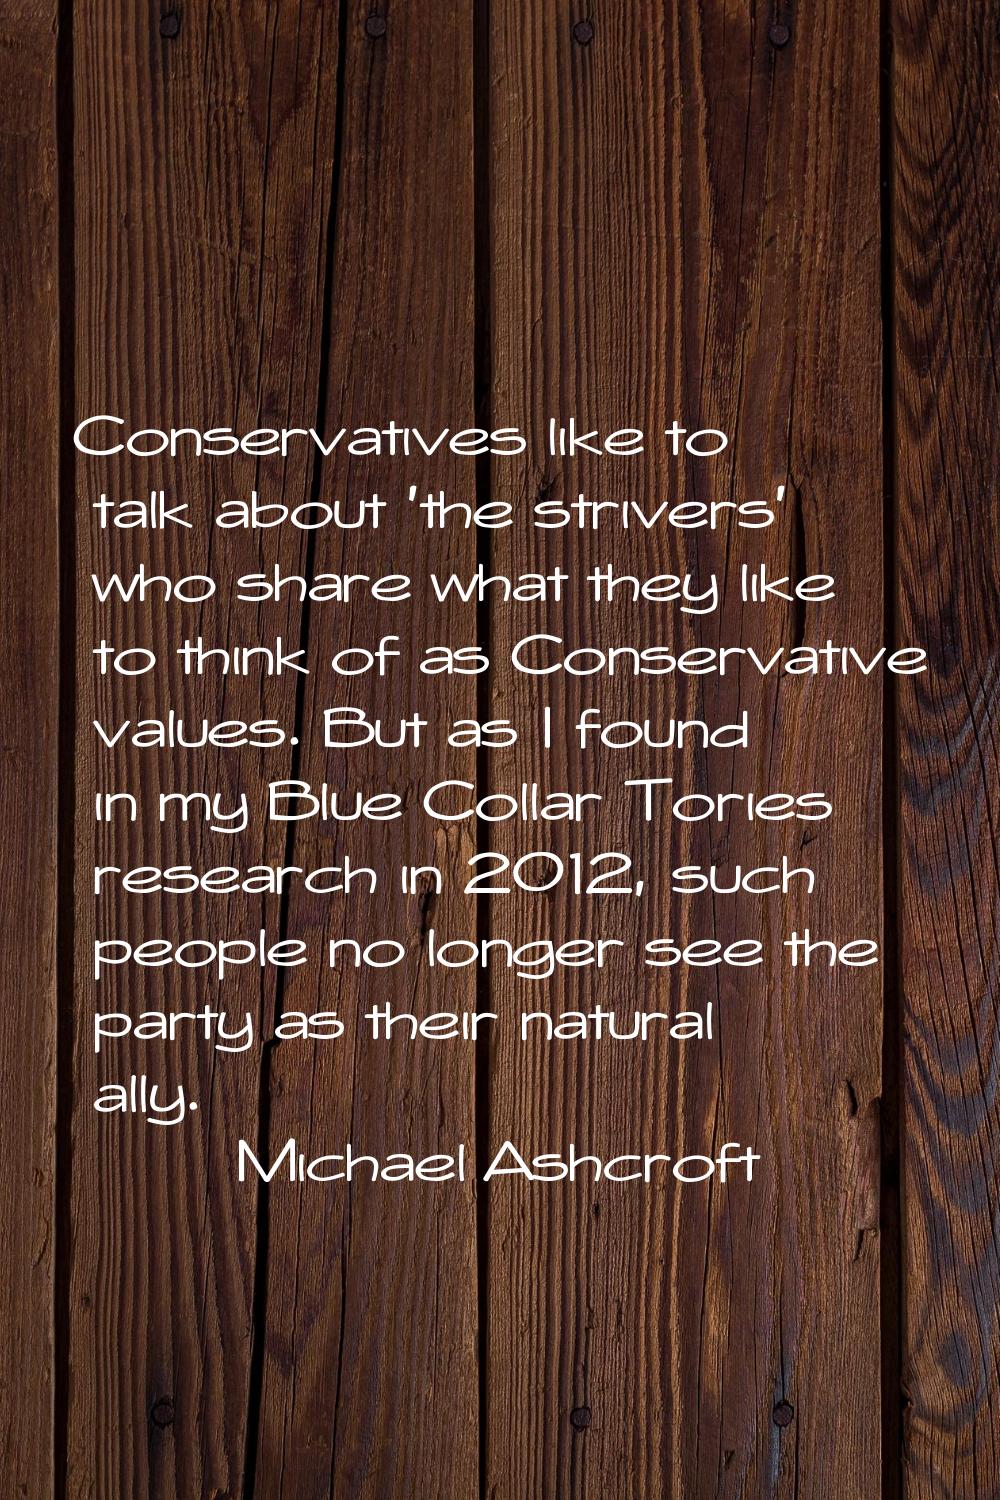 Conservatives like to talk about 'the strivers' who share what they like to think of as Conservativ